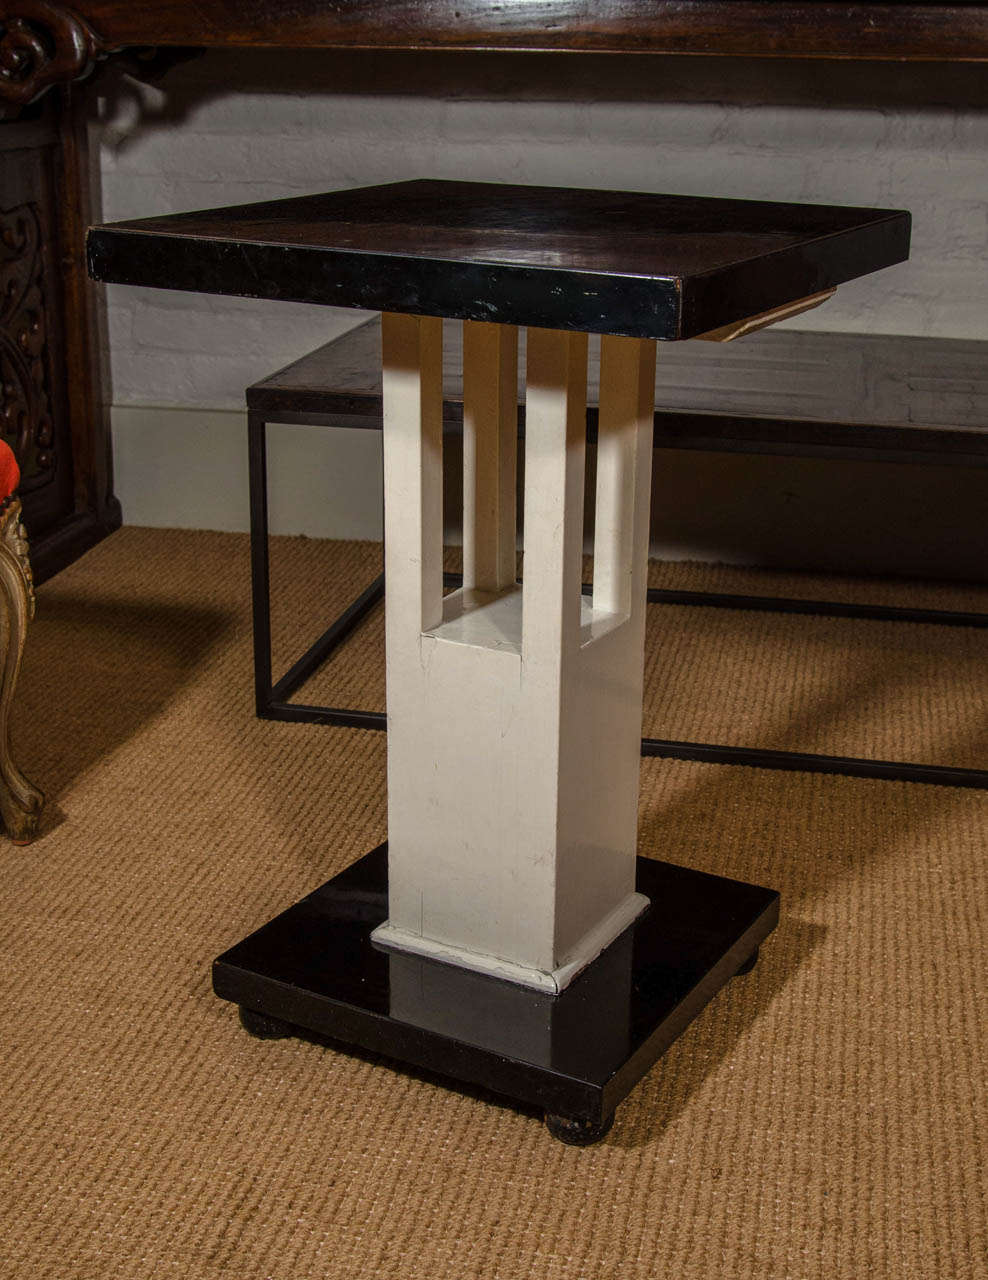 With rectangular black formica top on a white painted pedestal, on a black formica square base with round feet